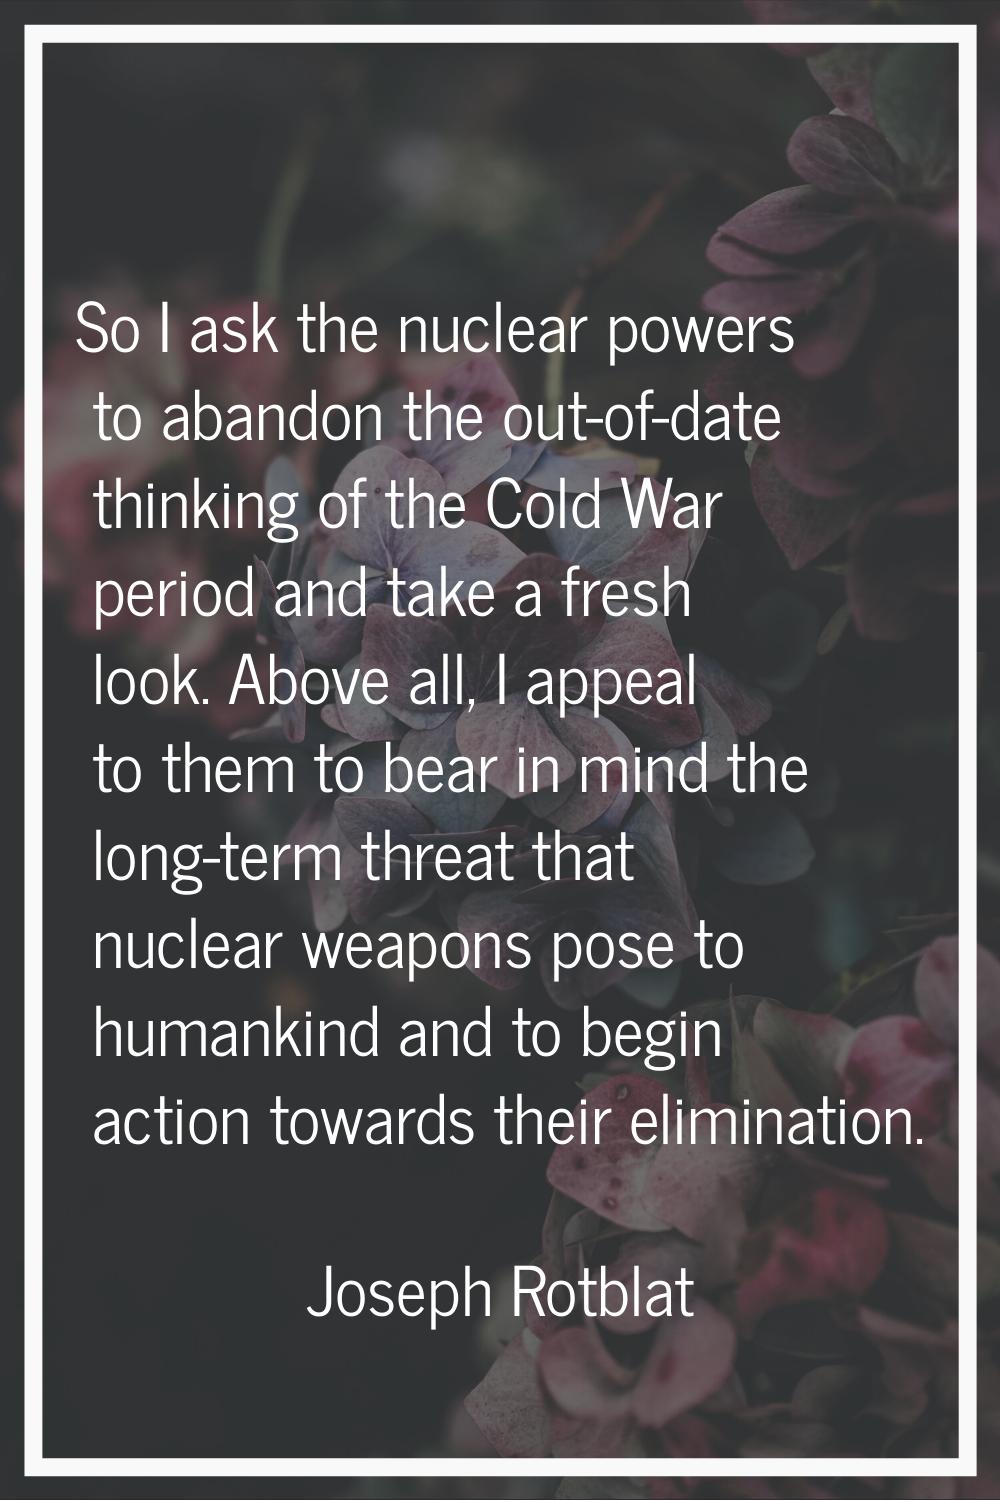 So I ask the nuclear powers to abandon the out-of-date thinking of the Cold War period and take a f